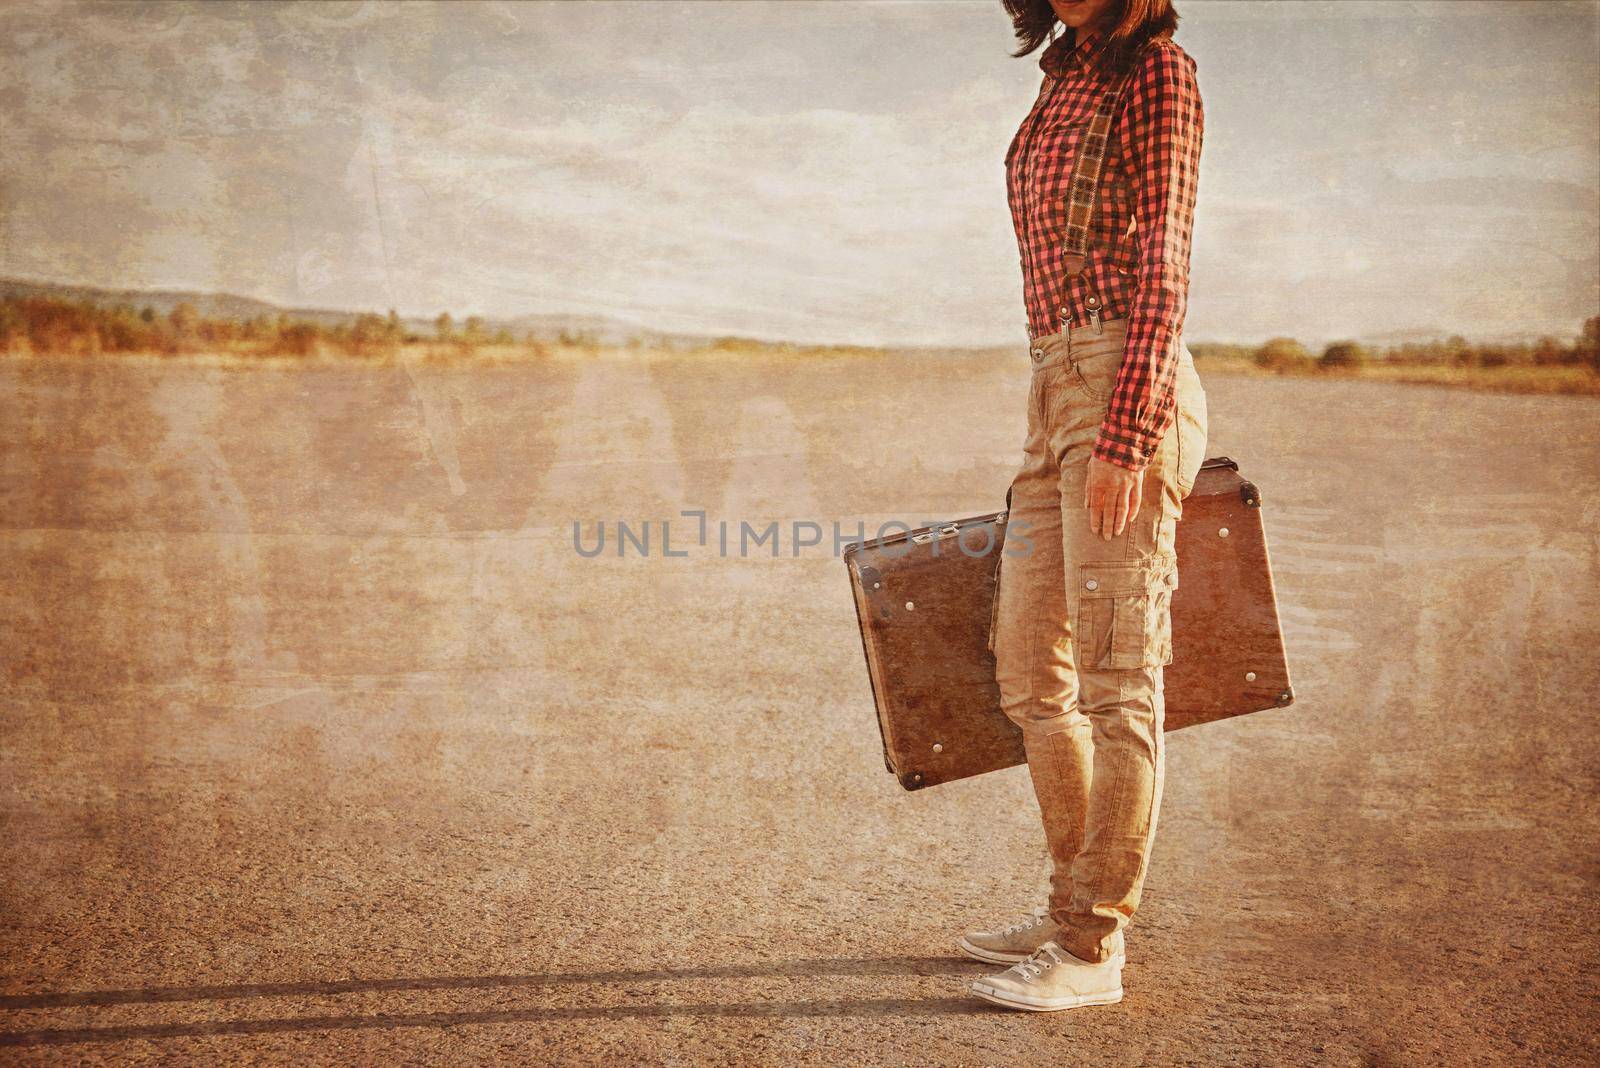 Unrecognizable woman is standing on road with vintage suitcase. Vintage image